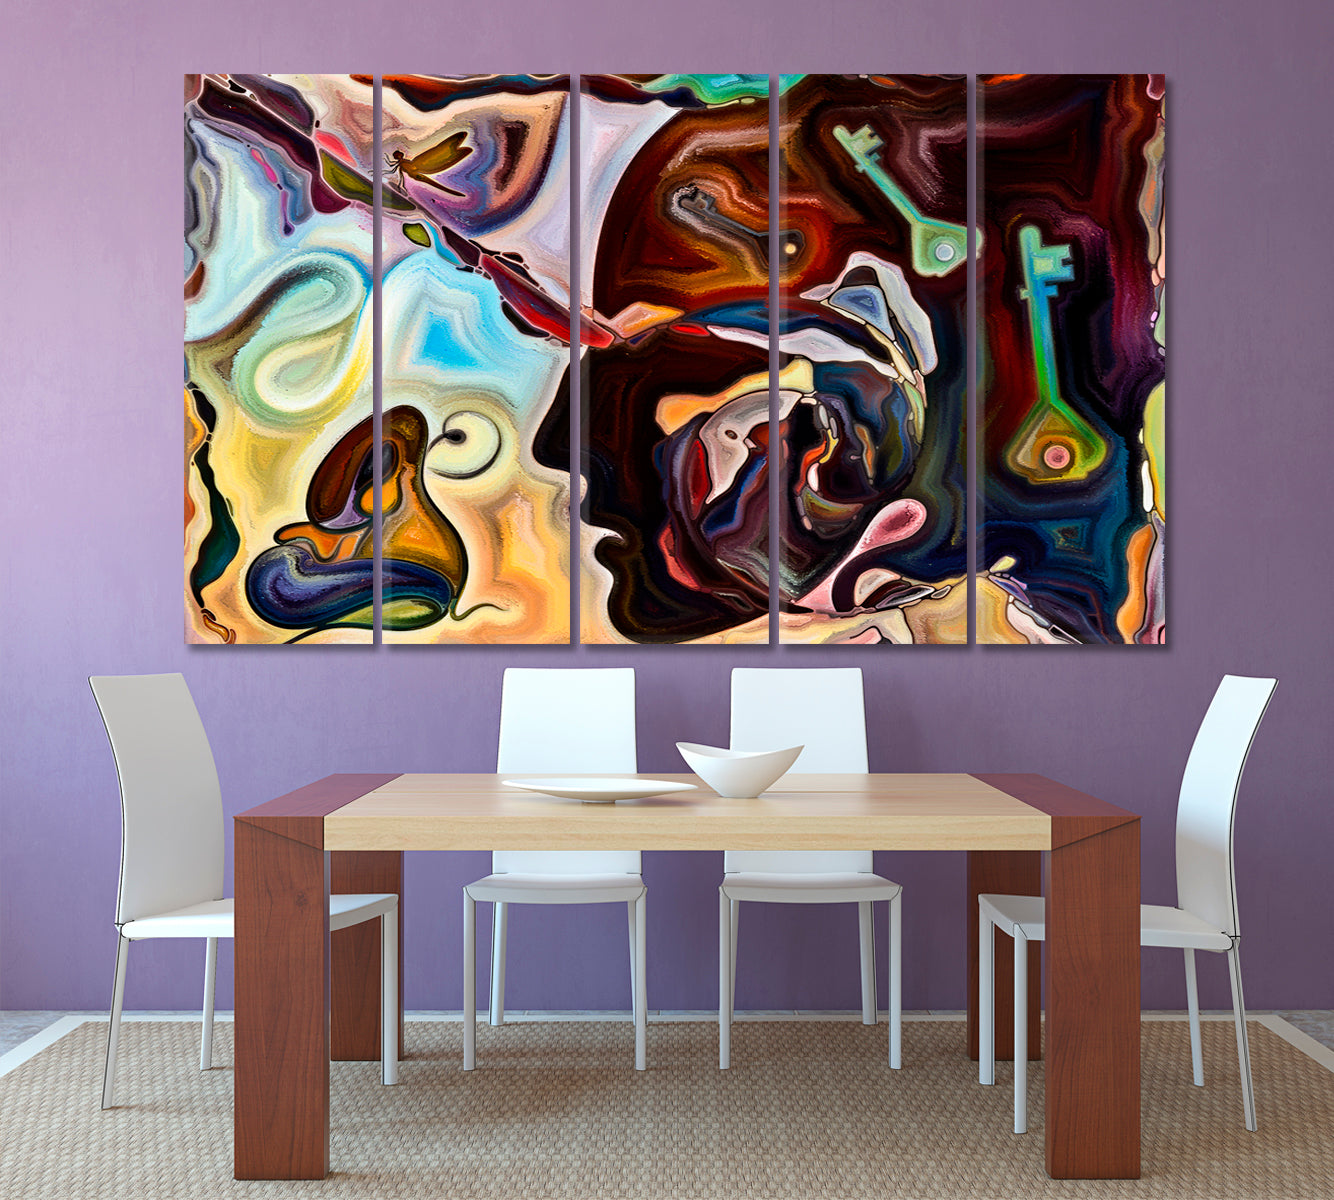 LIVES AND LIFE INSIDE A PAINTING Colorful Abstract Shapes Consciousness Art Artesty 5 panels 36" x 24" 